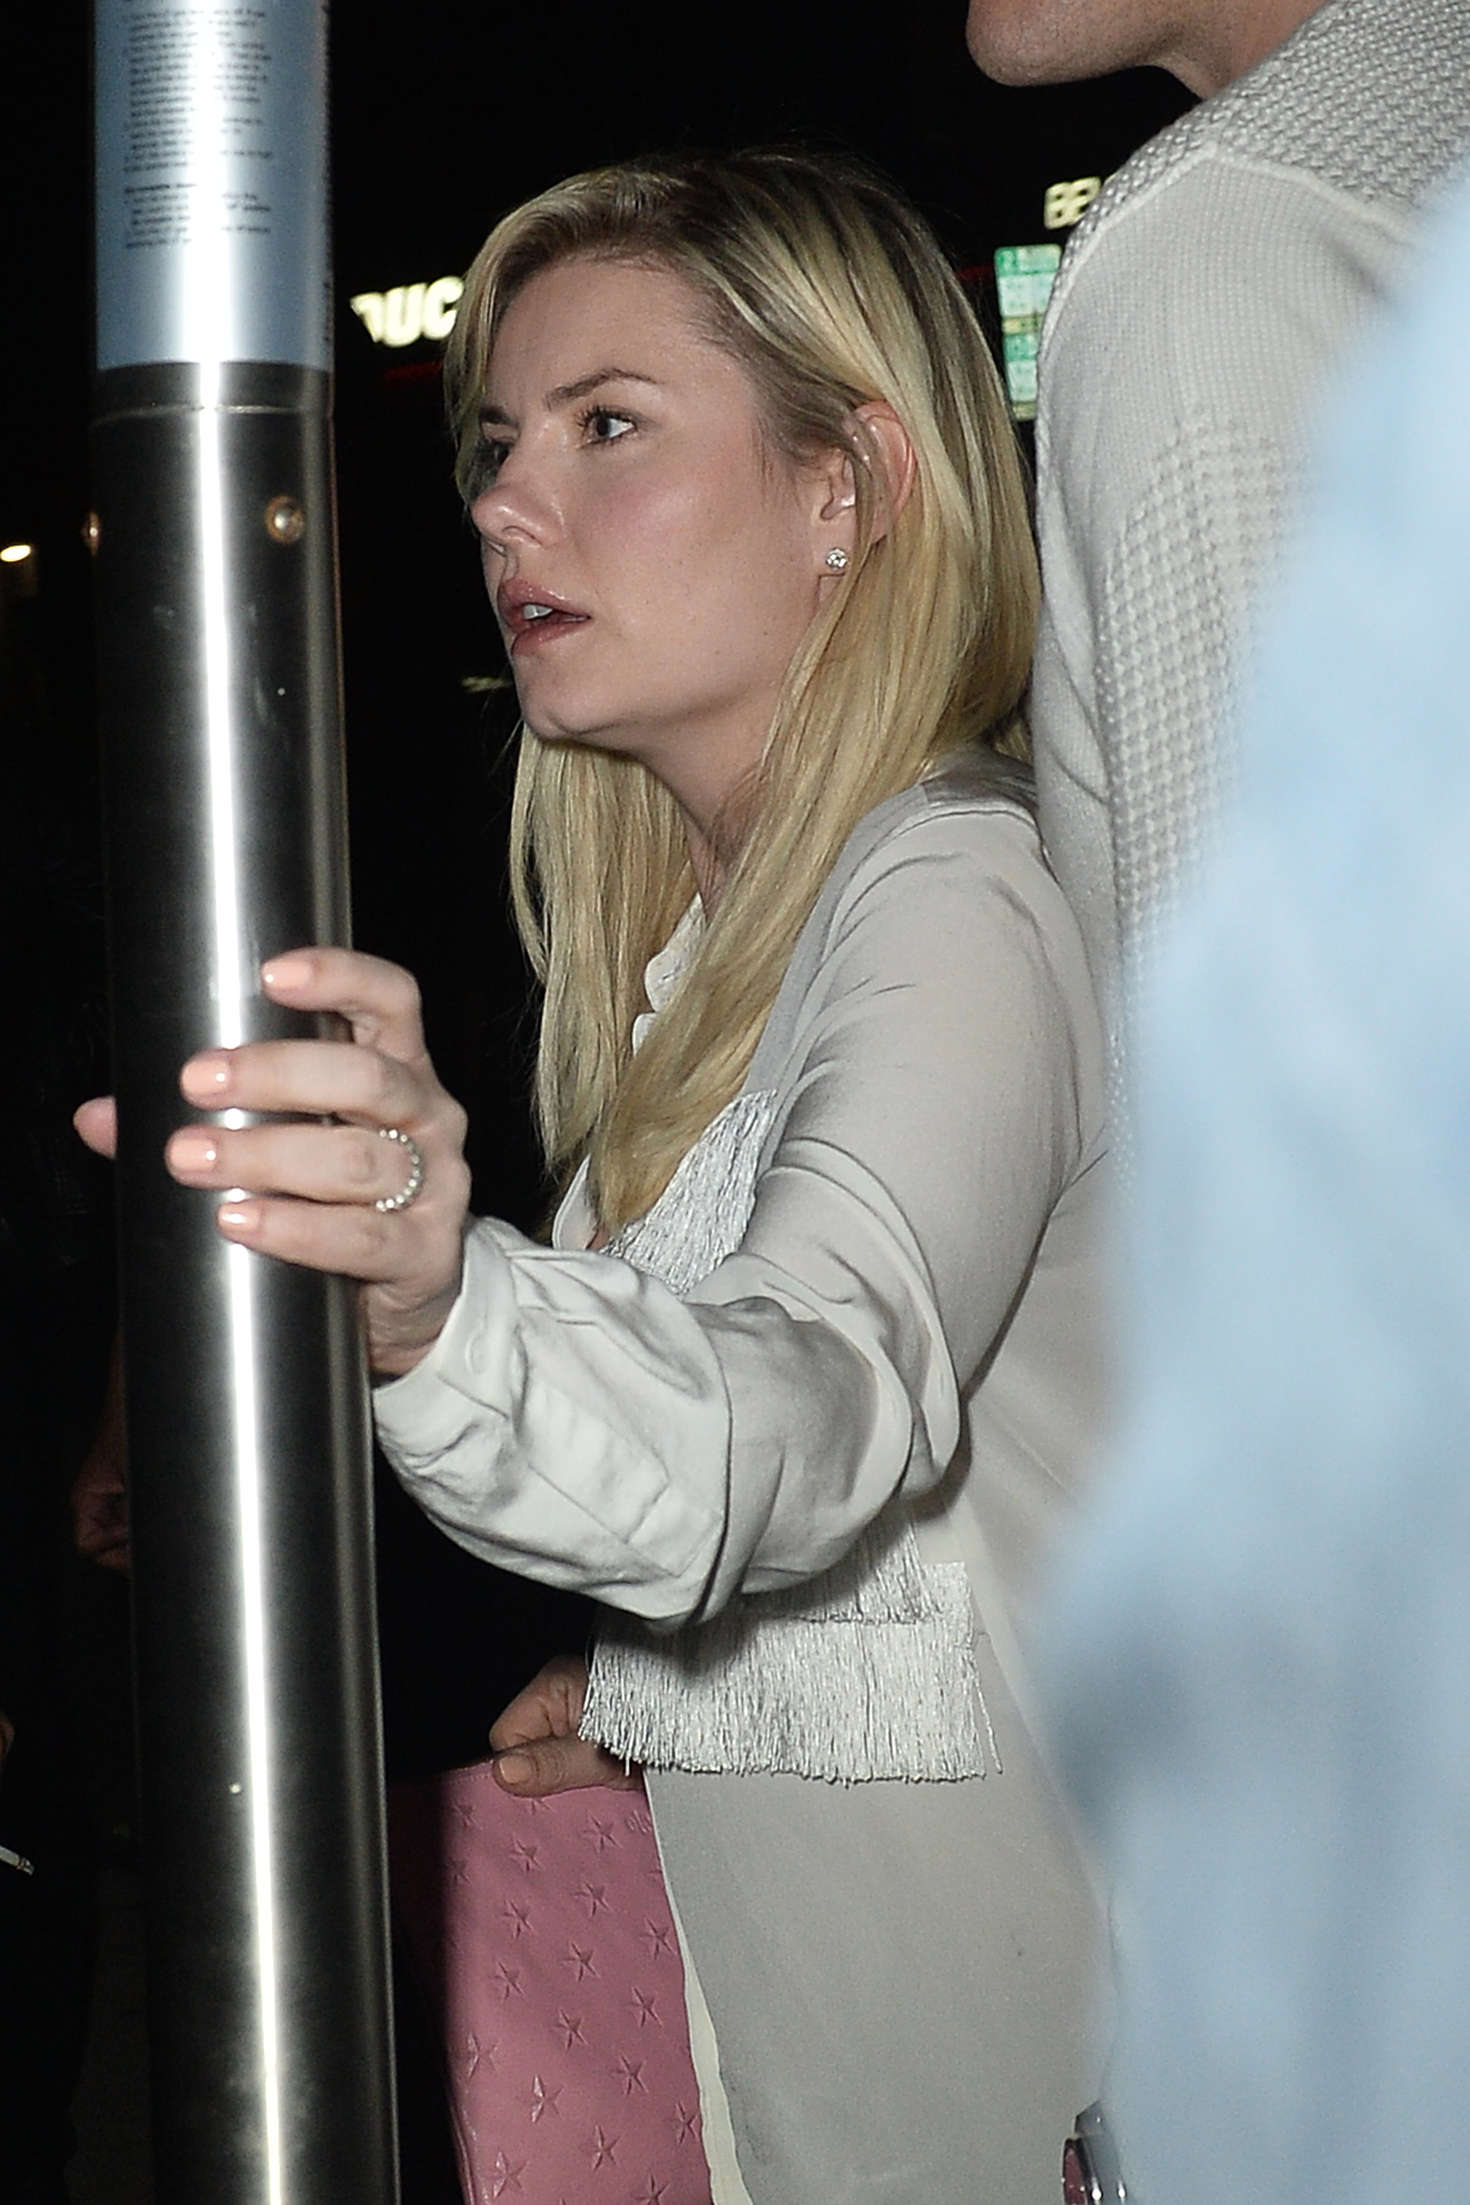 Elisha Cuthbert at The Nice Guy in West Hollywood